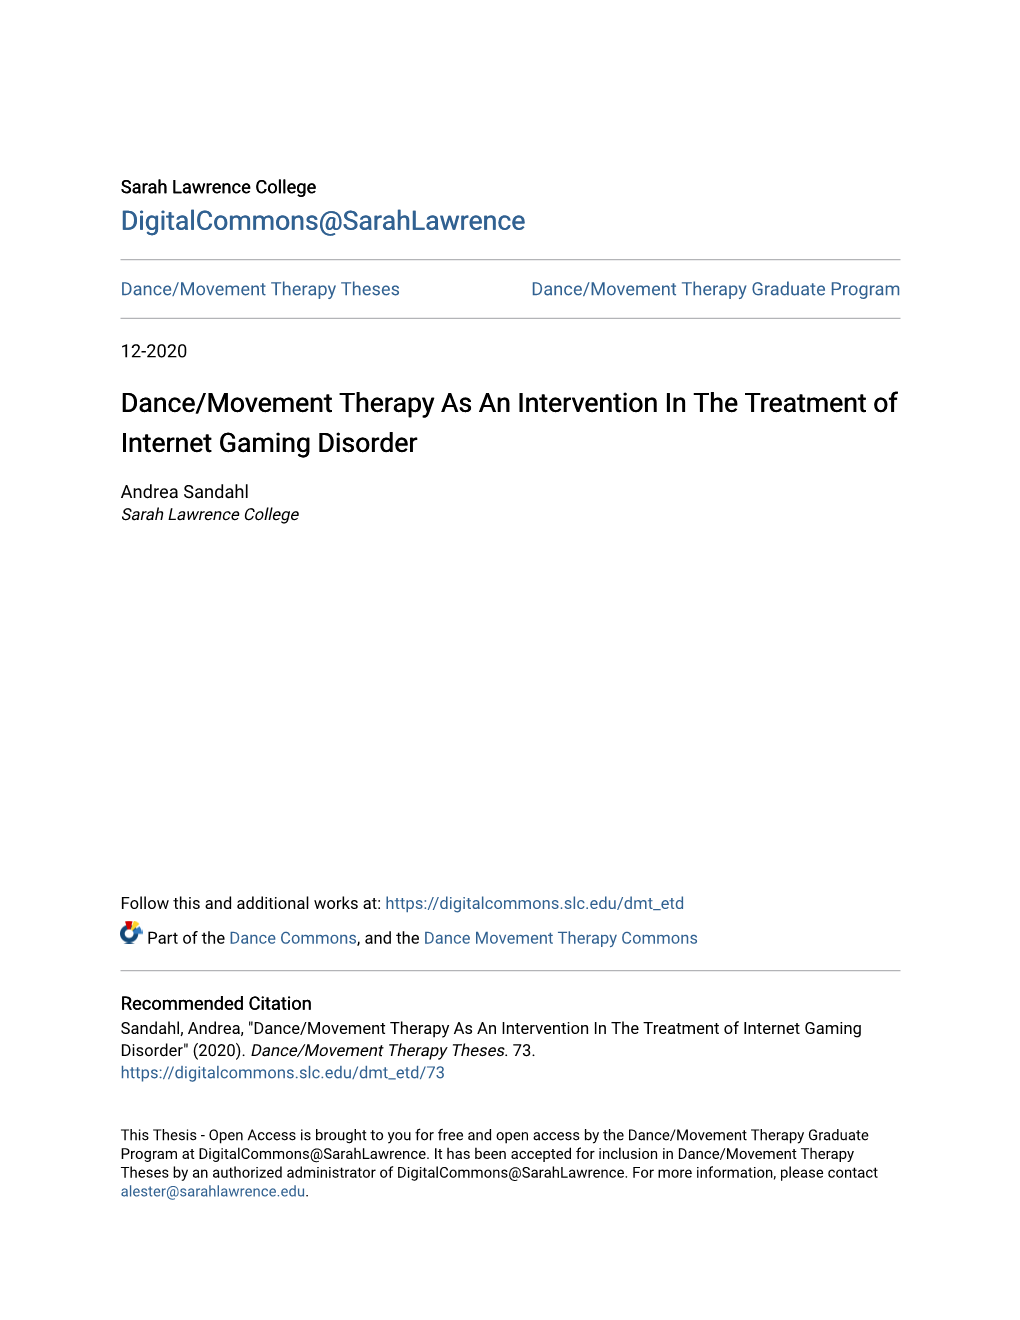 Dance/Movement Therapy As an Intervention in the Treatment of Internet Gaming Disorder